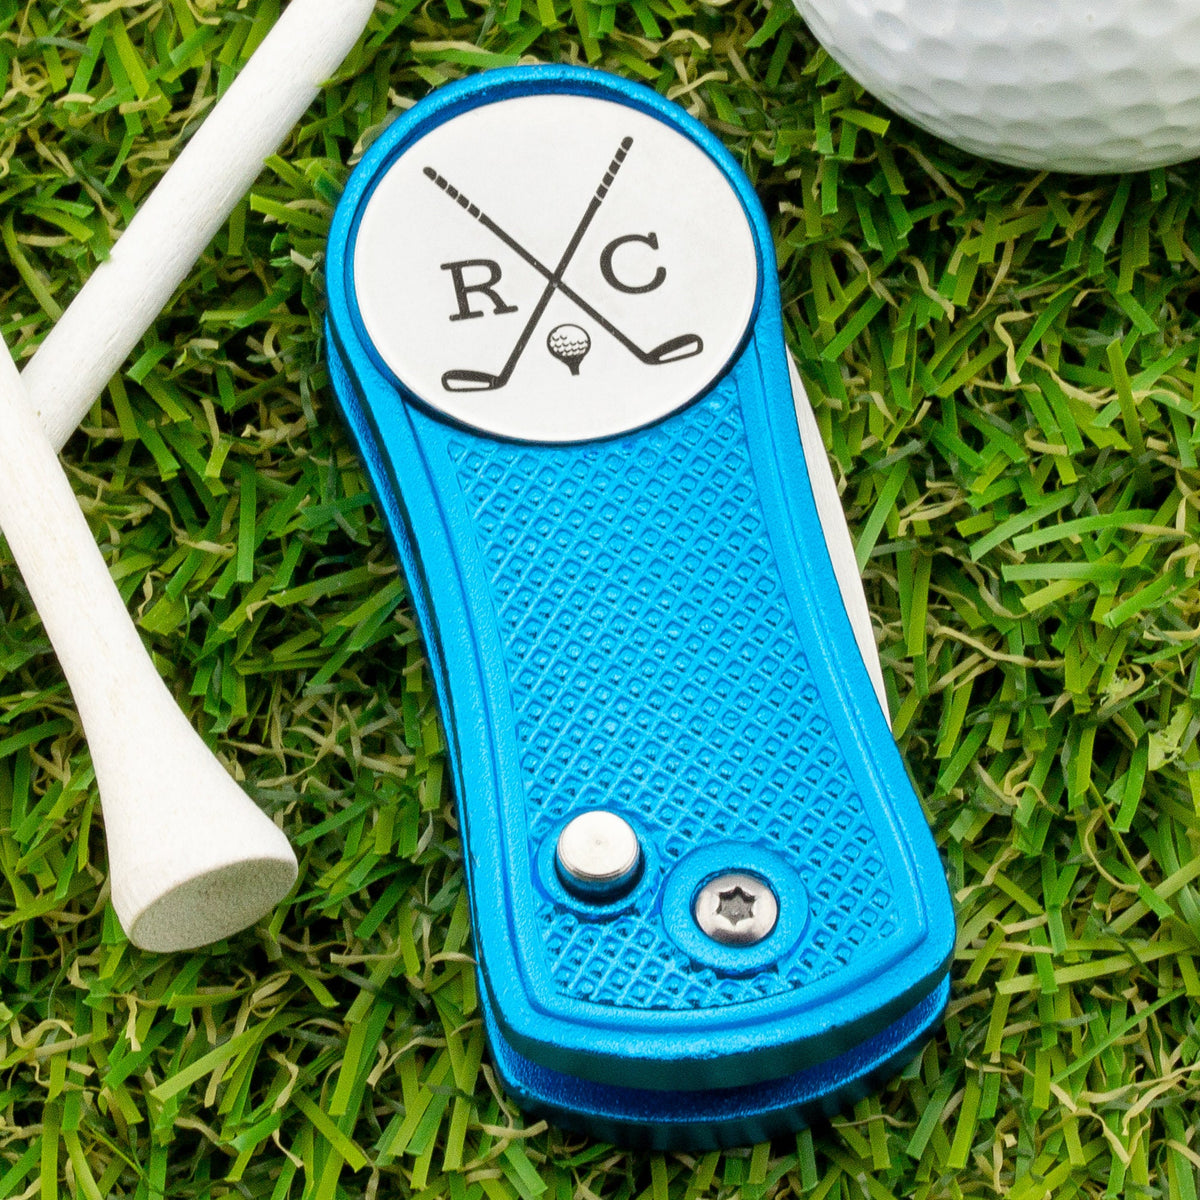 Divot Tool, Golf Ball Marker, Father of the Groom Gift, Wedding Gift for Dad, Personalized Golf Gift, Wedding Party Gift